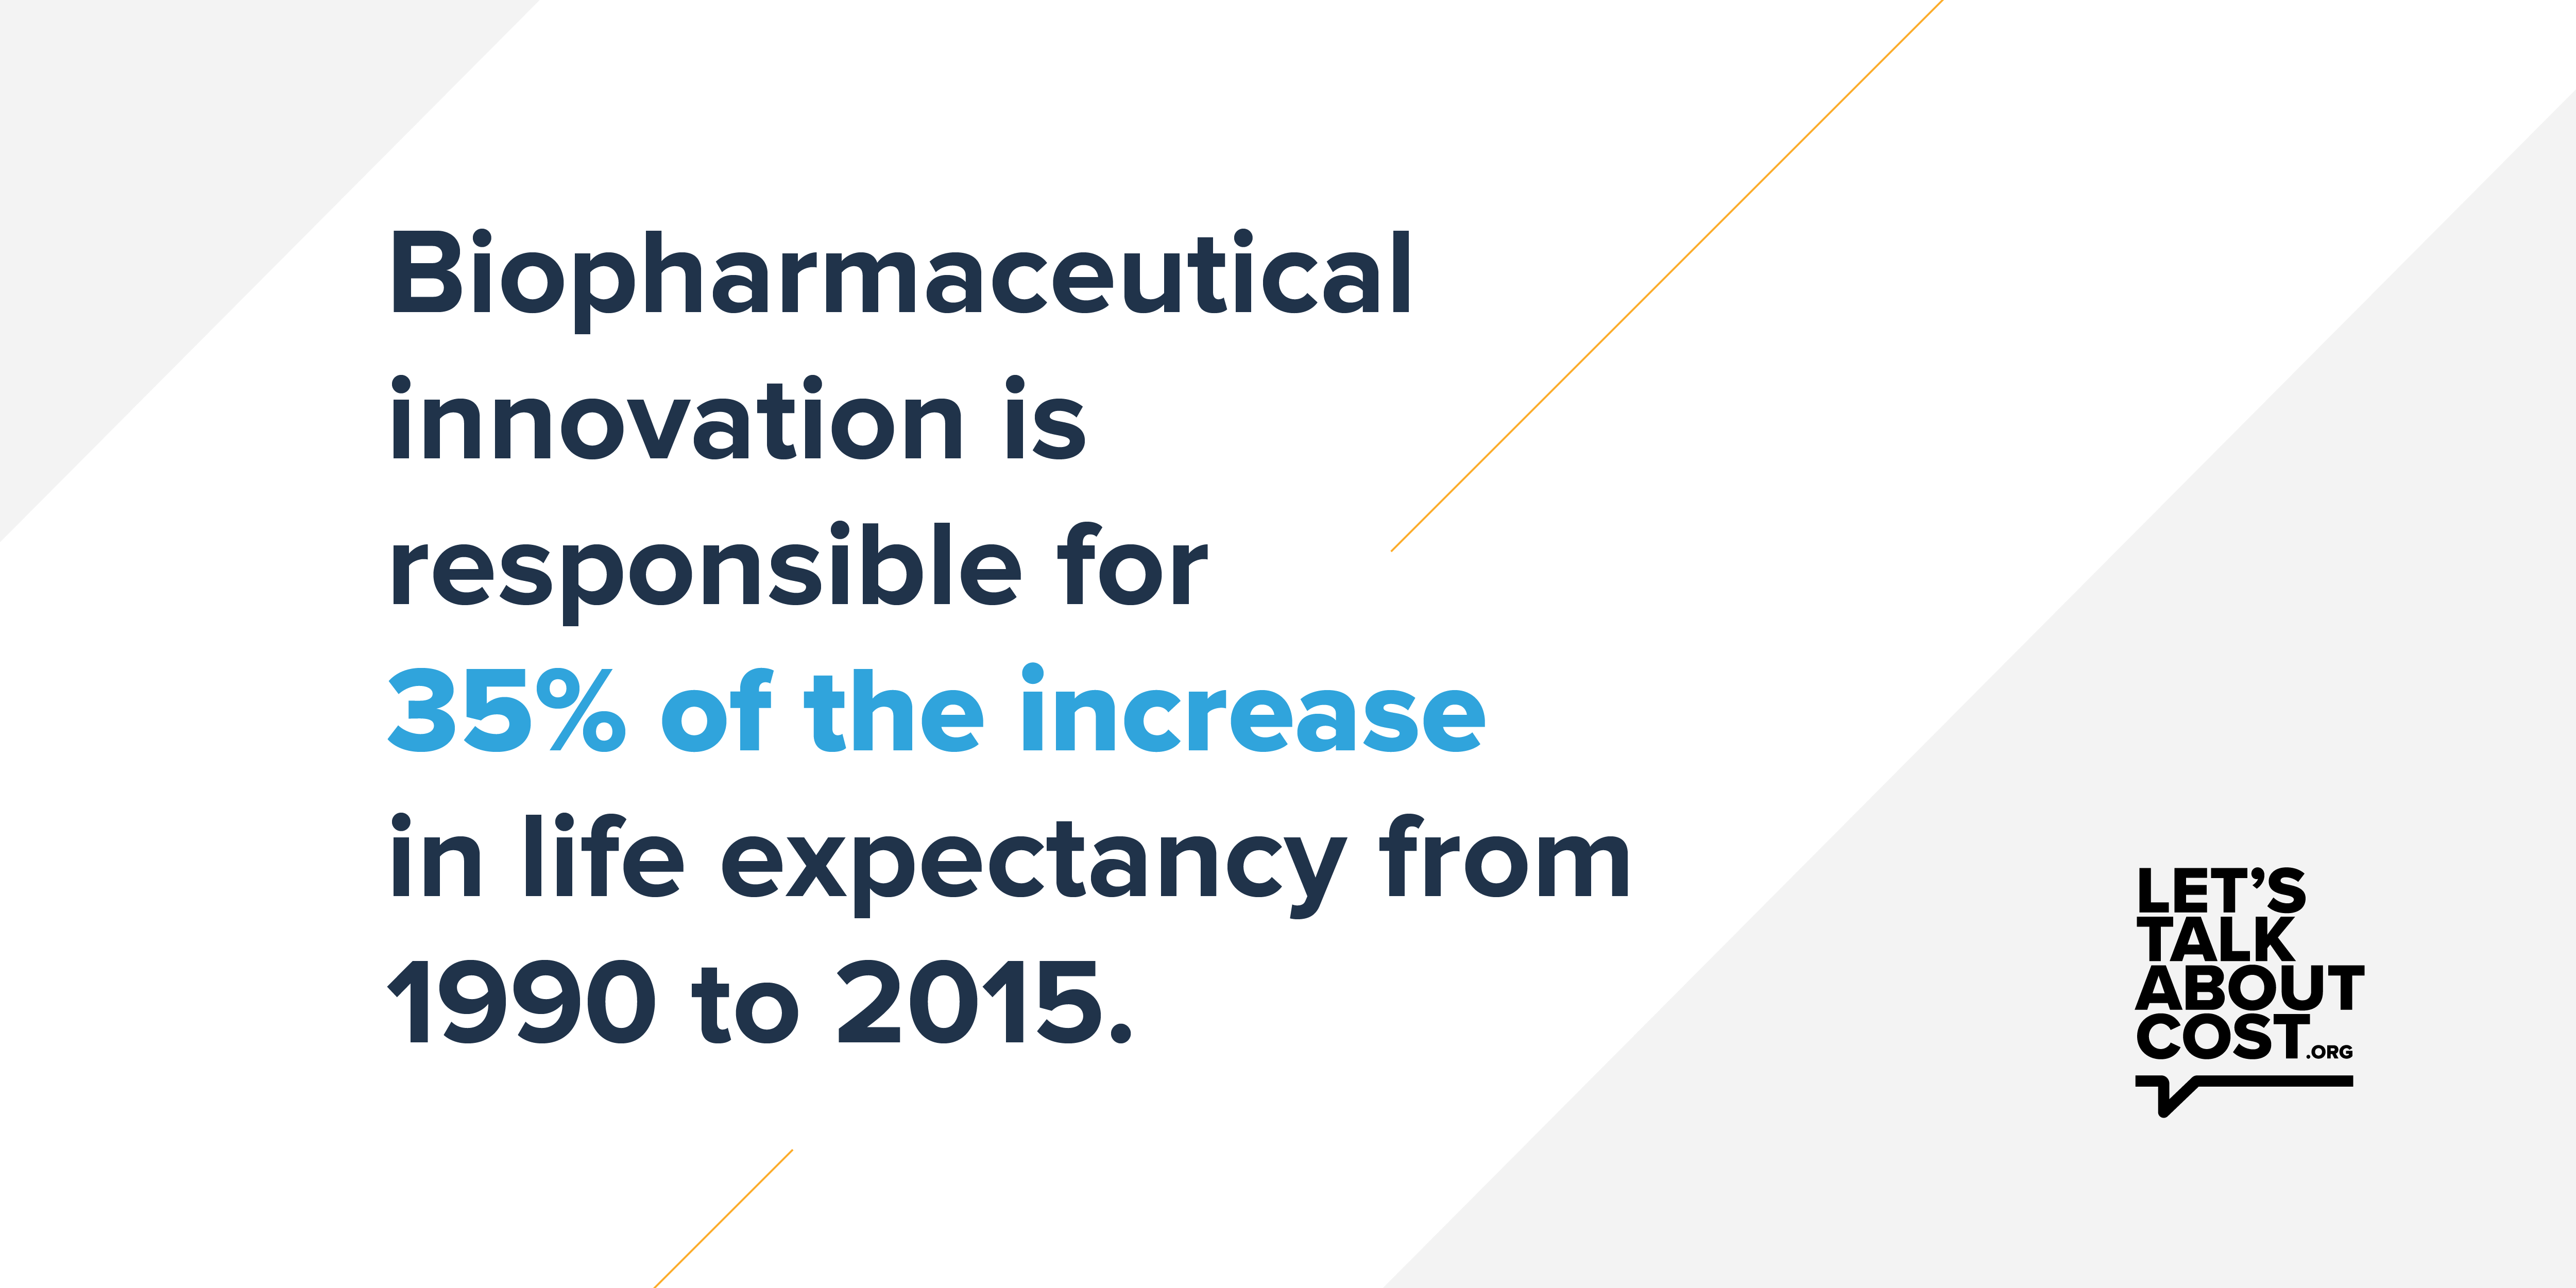 Study finds biopharmaceutical innovation is responsible for 35% of the increase in life expectancy from 1990 to 2015